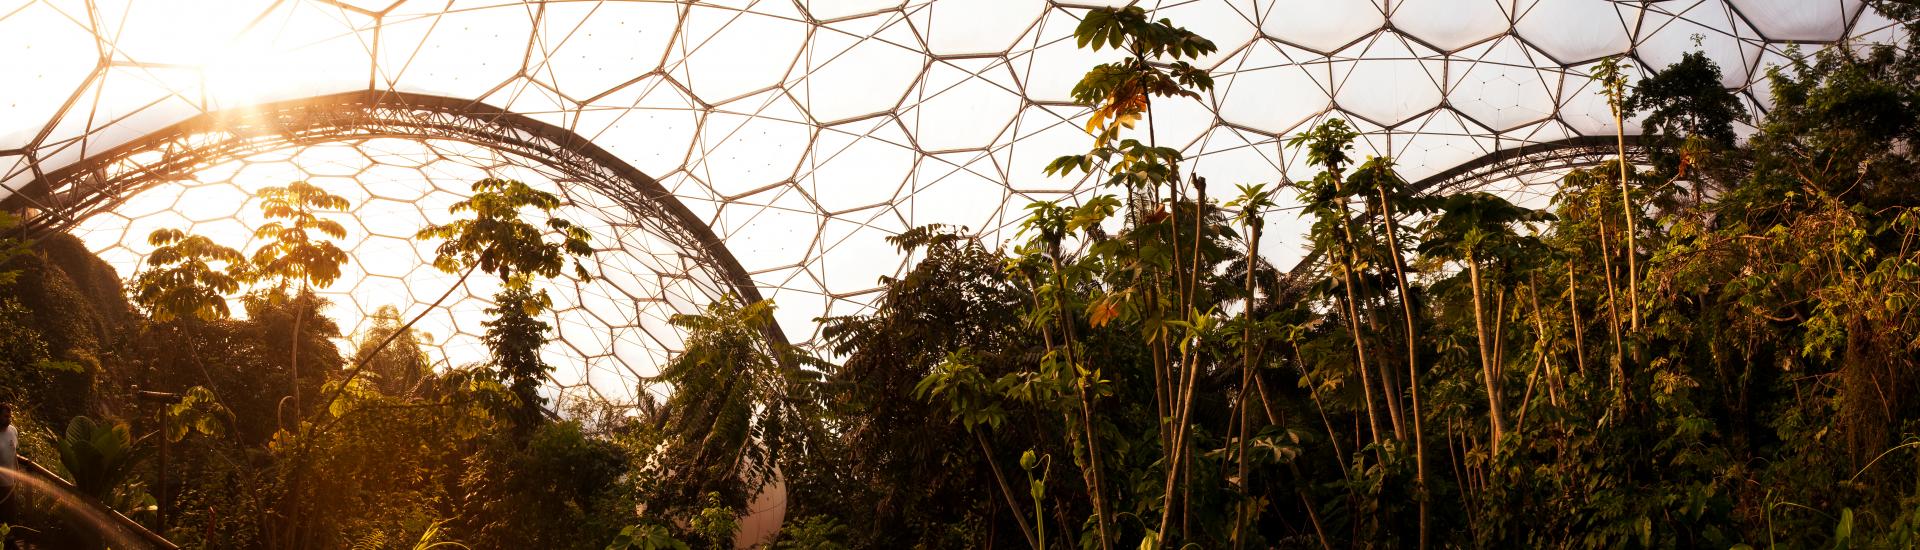 A view from inside the biome with the sunset showing through